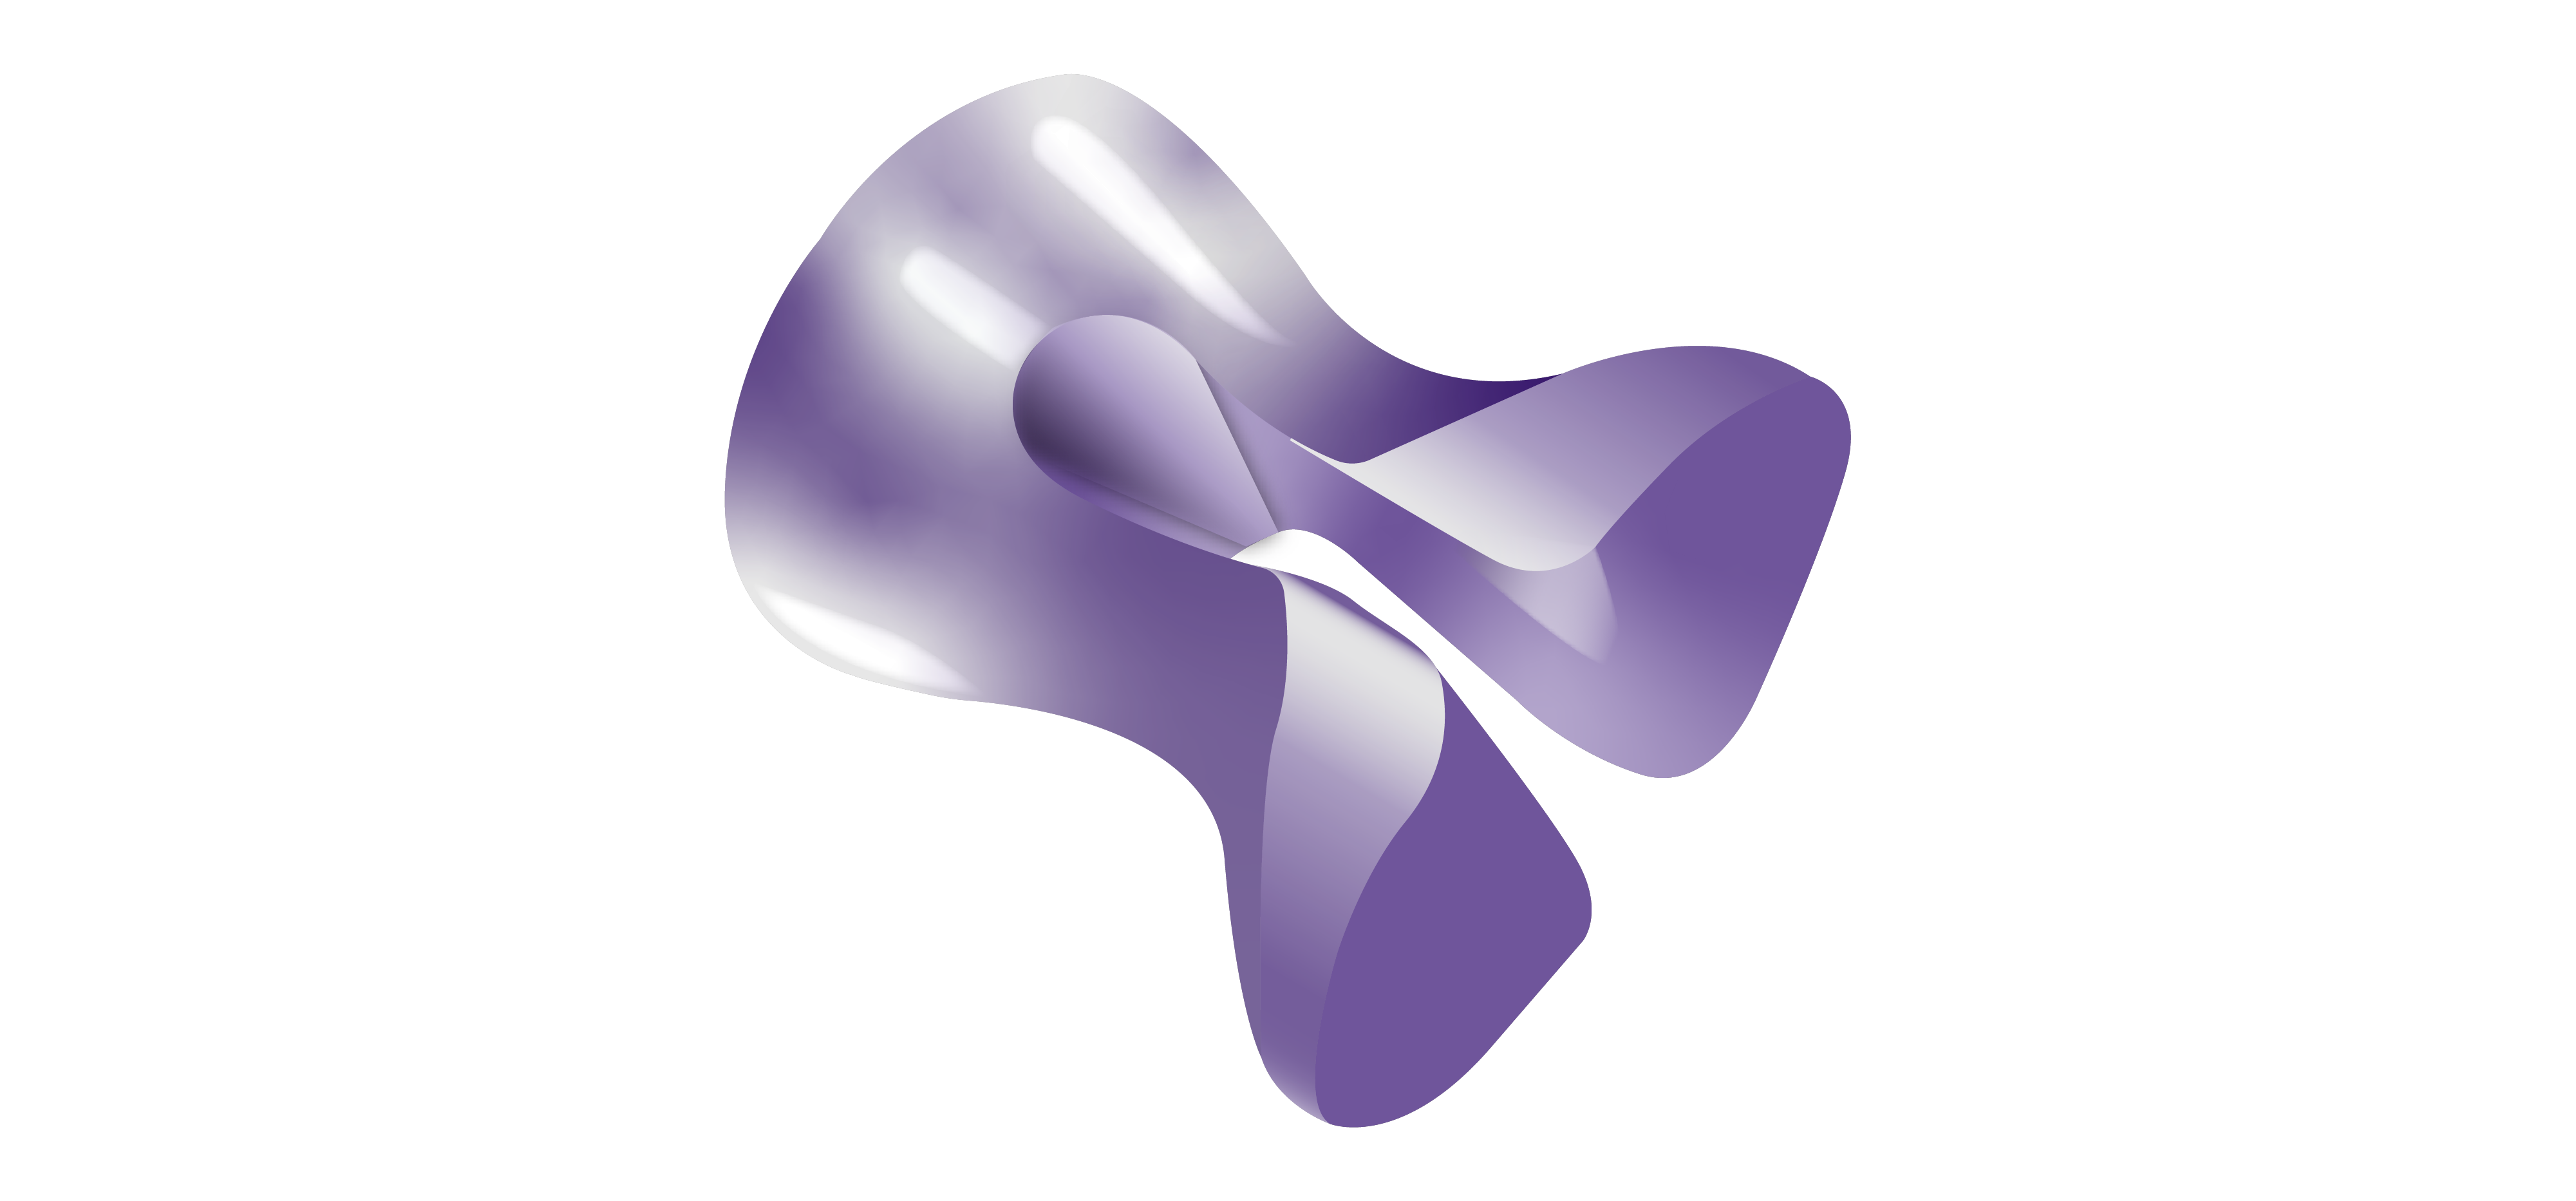 A uniquely shaped purple metallic thumb tack shows various types of curvature.